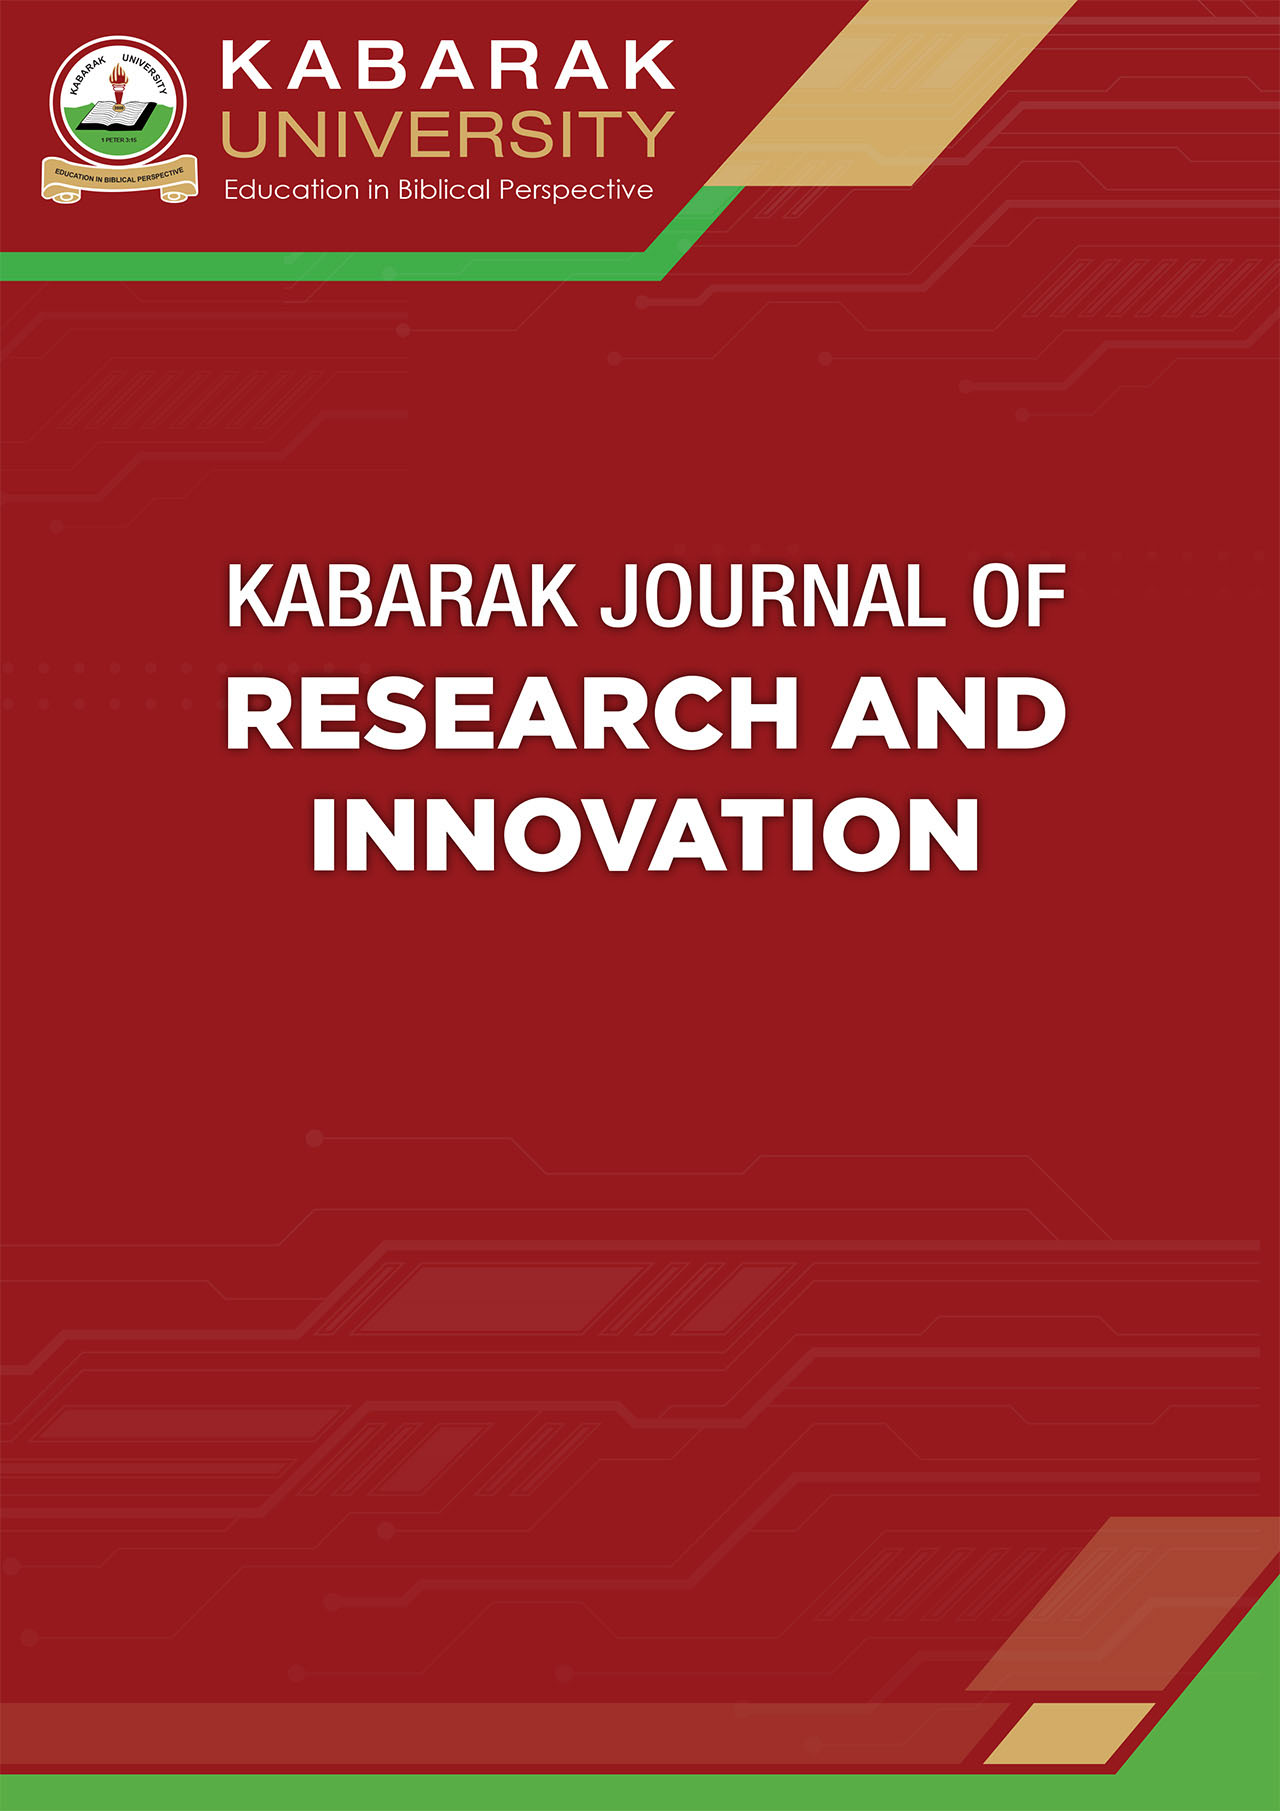 					View Vol. 11 No. 1 (2021): Kabarak Journal of Research and Innovation (KJRI)
				